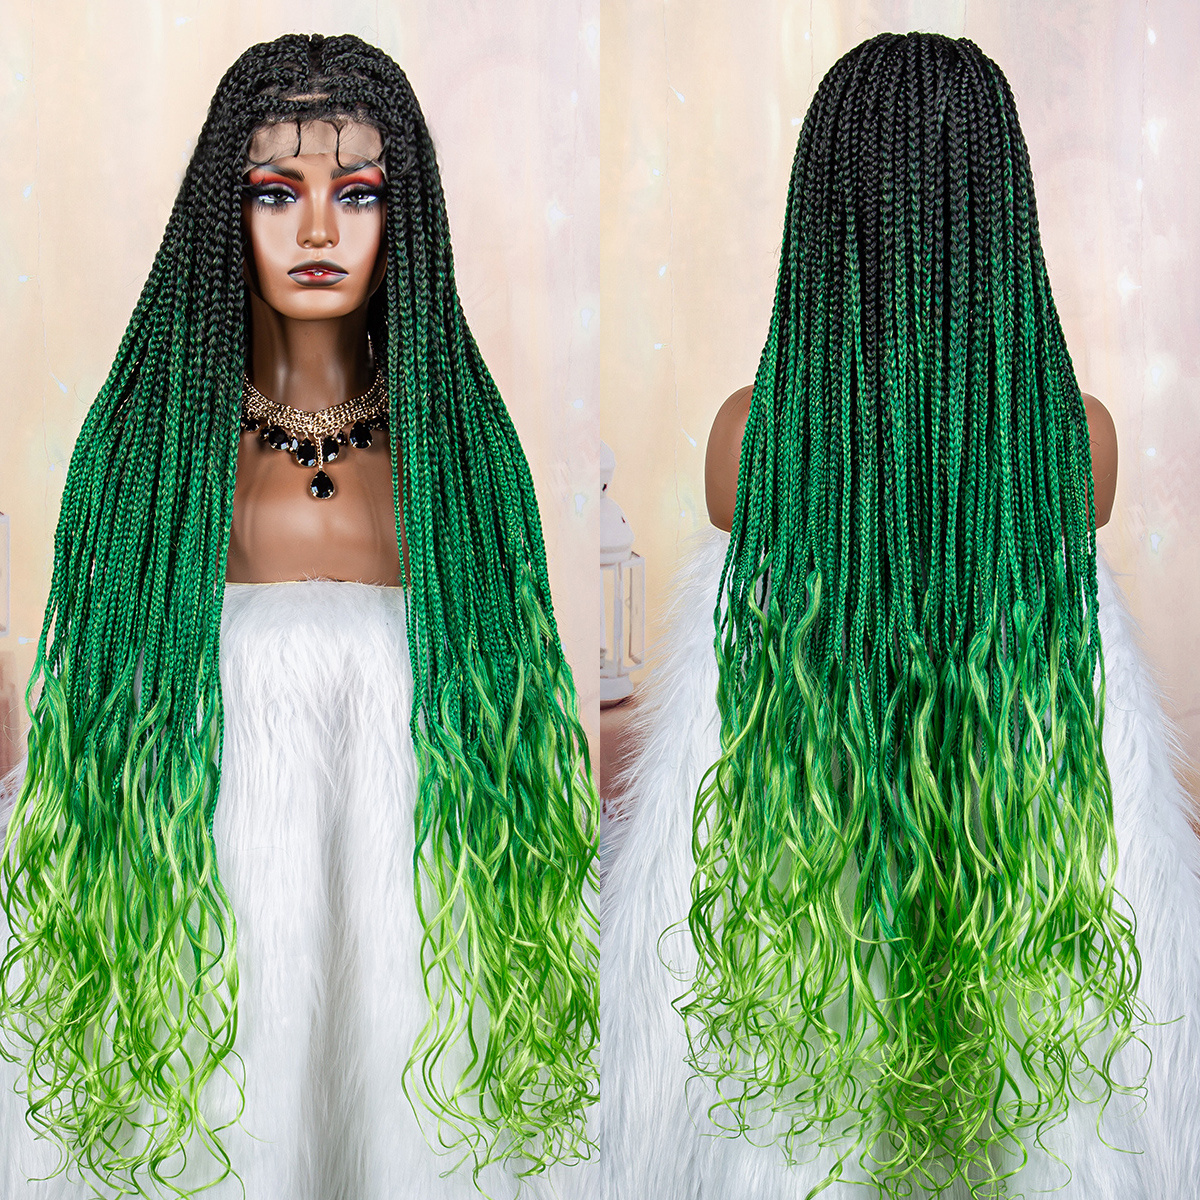 Healthy&Beauty 36 Inch Synthetic Braided Hair Darkgreen/Green Box Braids  With Curly Hair Ends